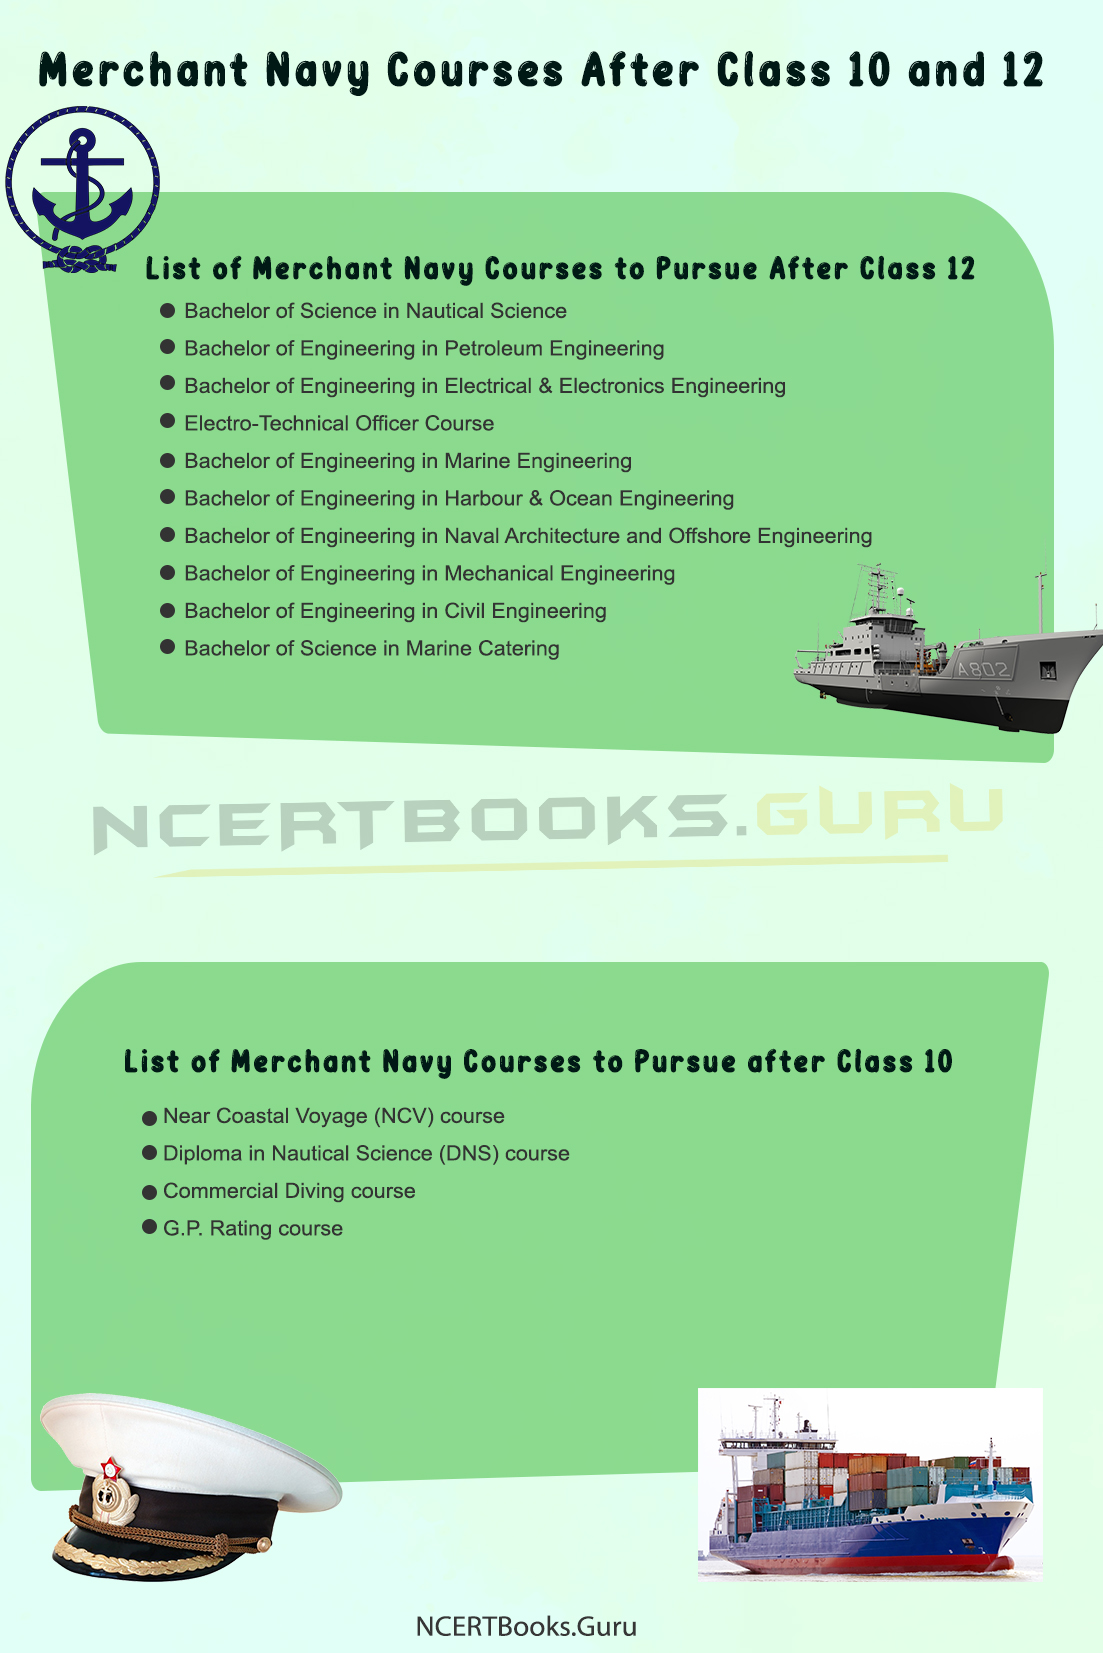 Merchant Navy Courses After Class 10 and 12